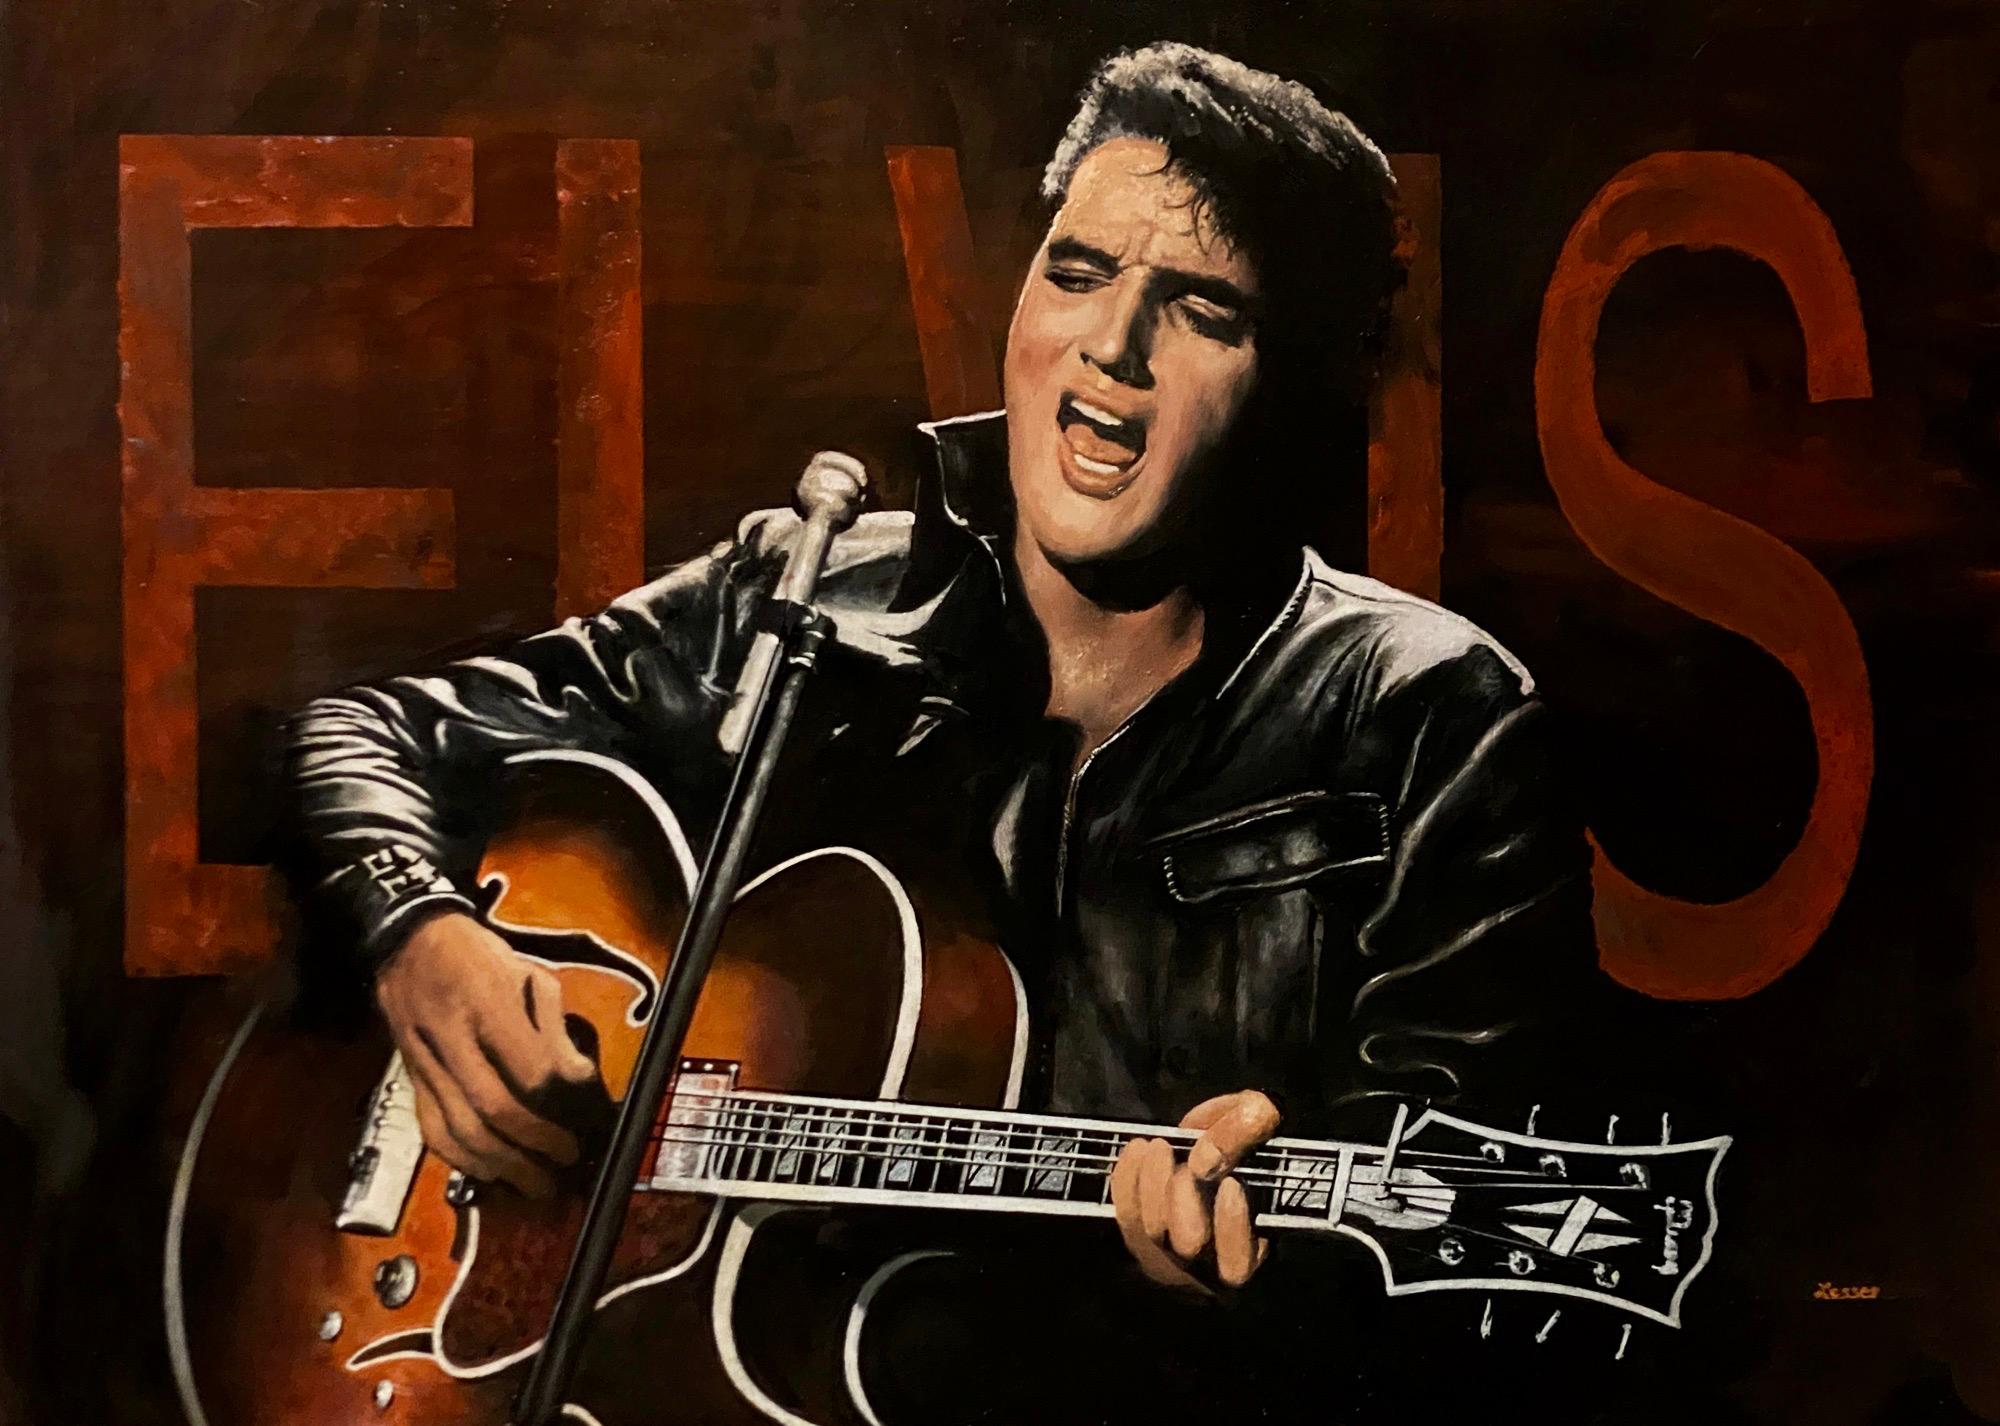 Elvis Presley 1968 Comeback Performance - Painting by Ron Lesser